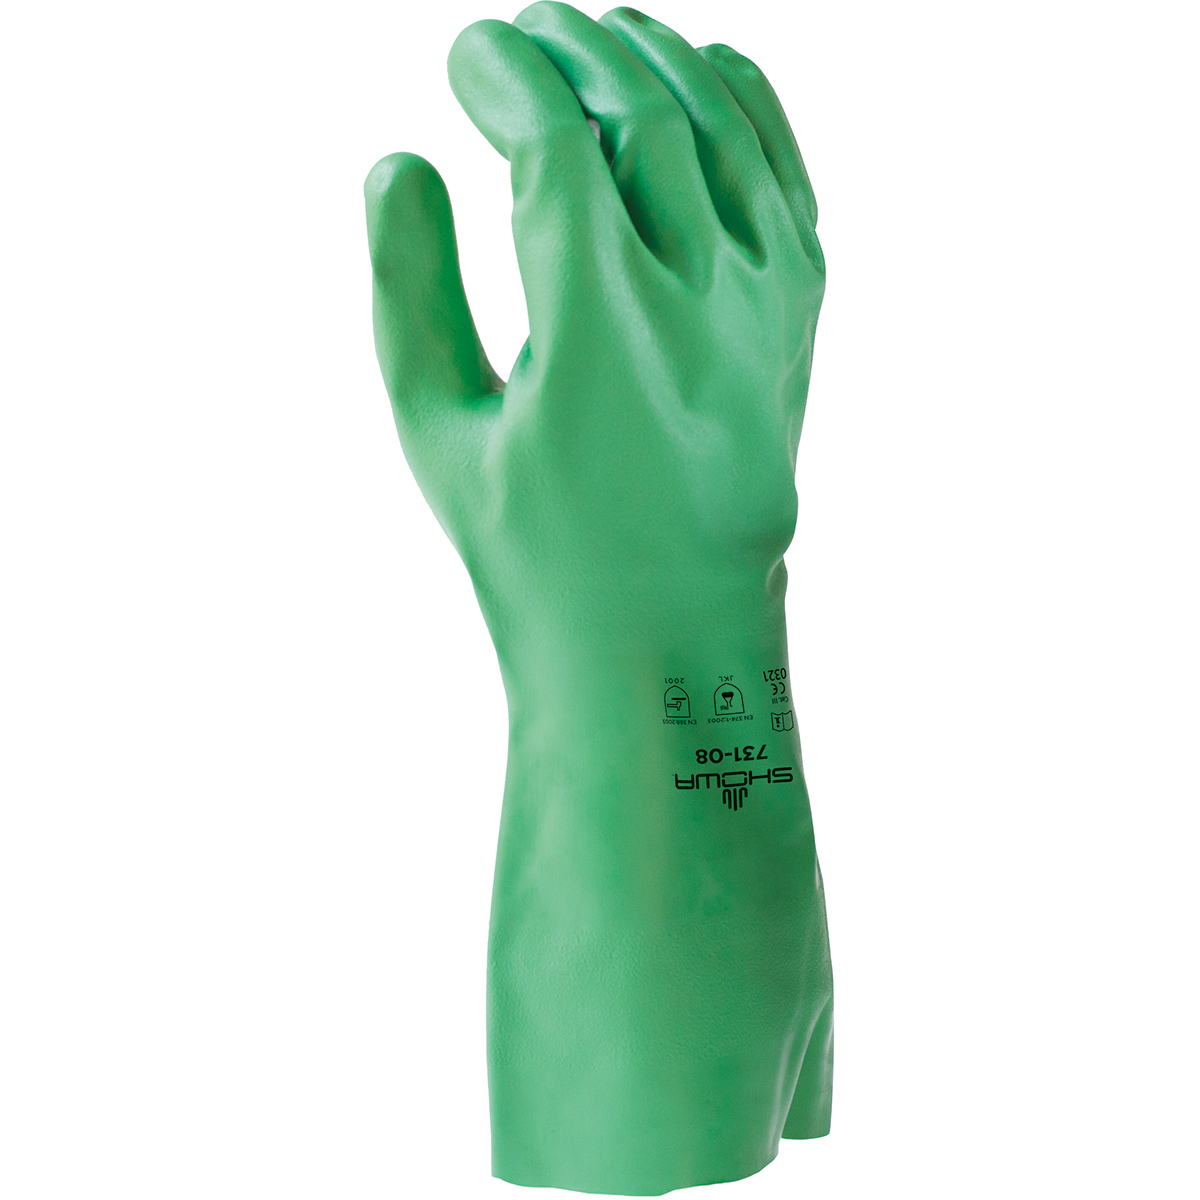 Biodegradable, created w/premium grade polymers and nitrile, 15-mil, green, bisque finish, flocklined/L - Chemical Resistant